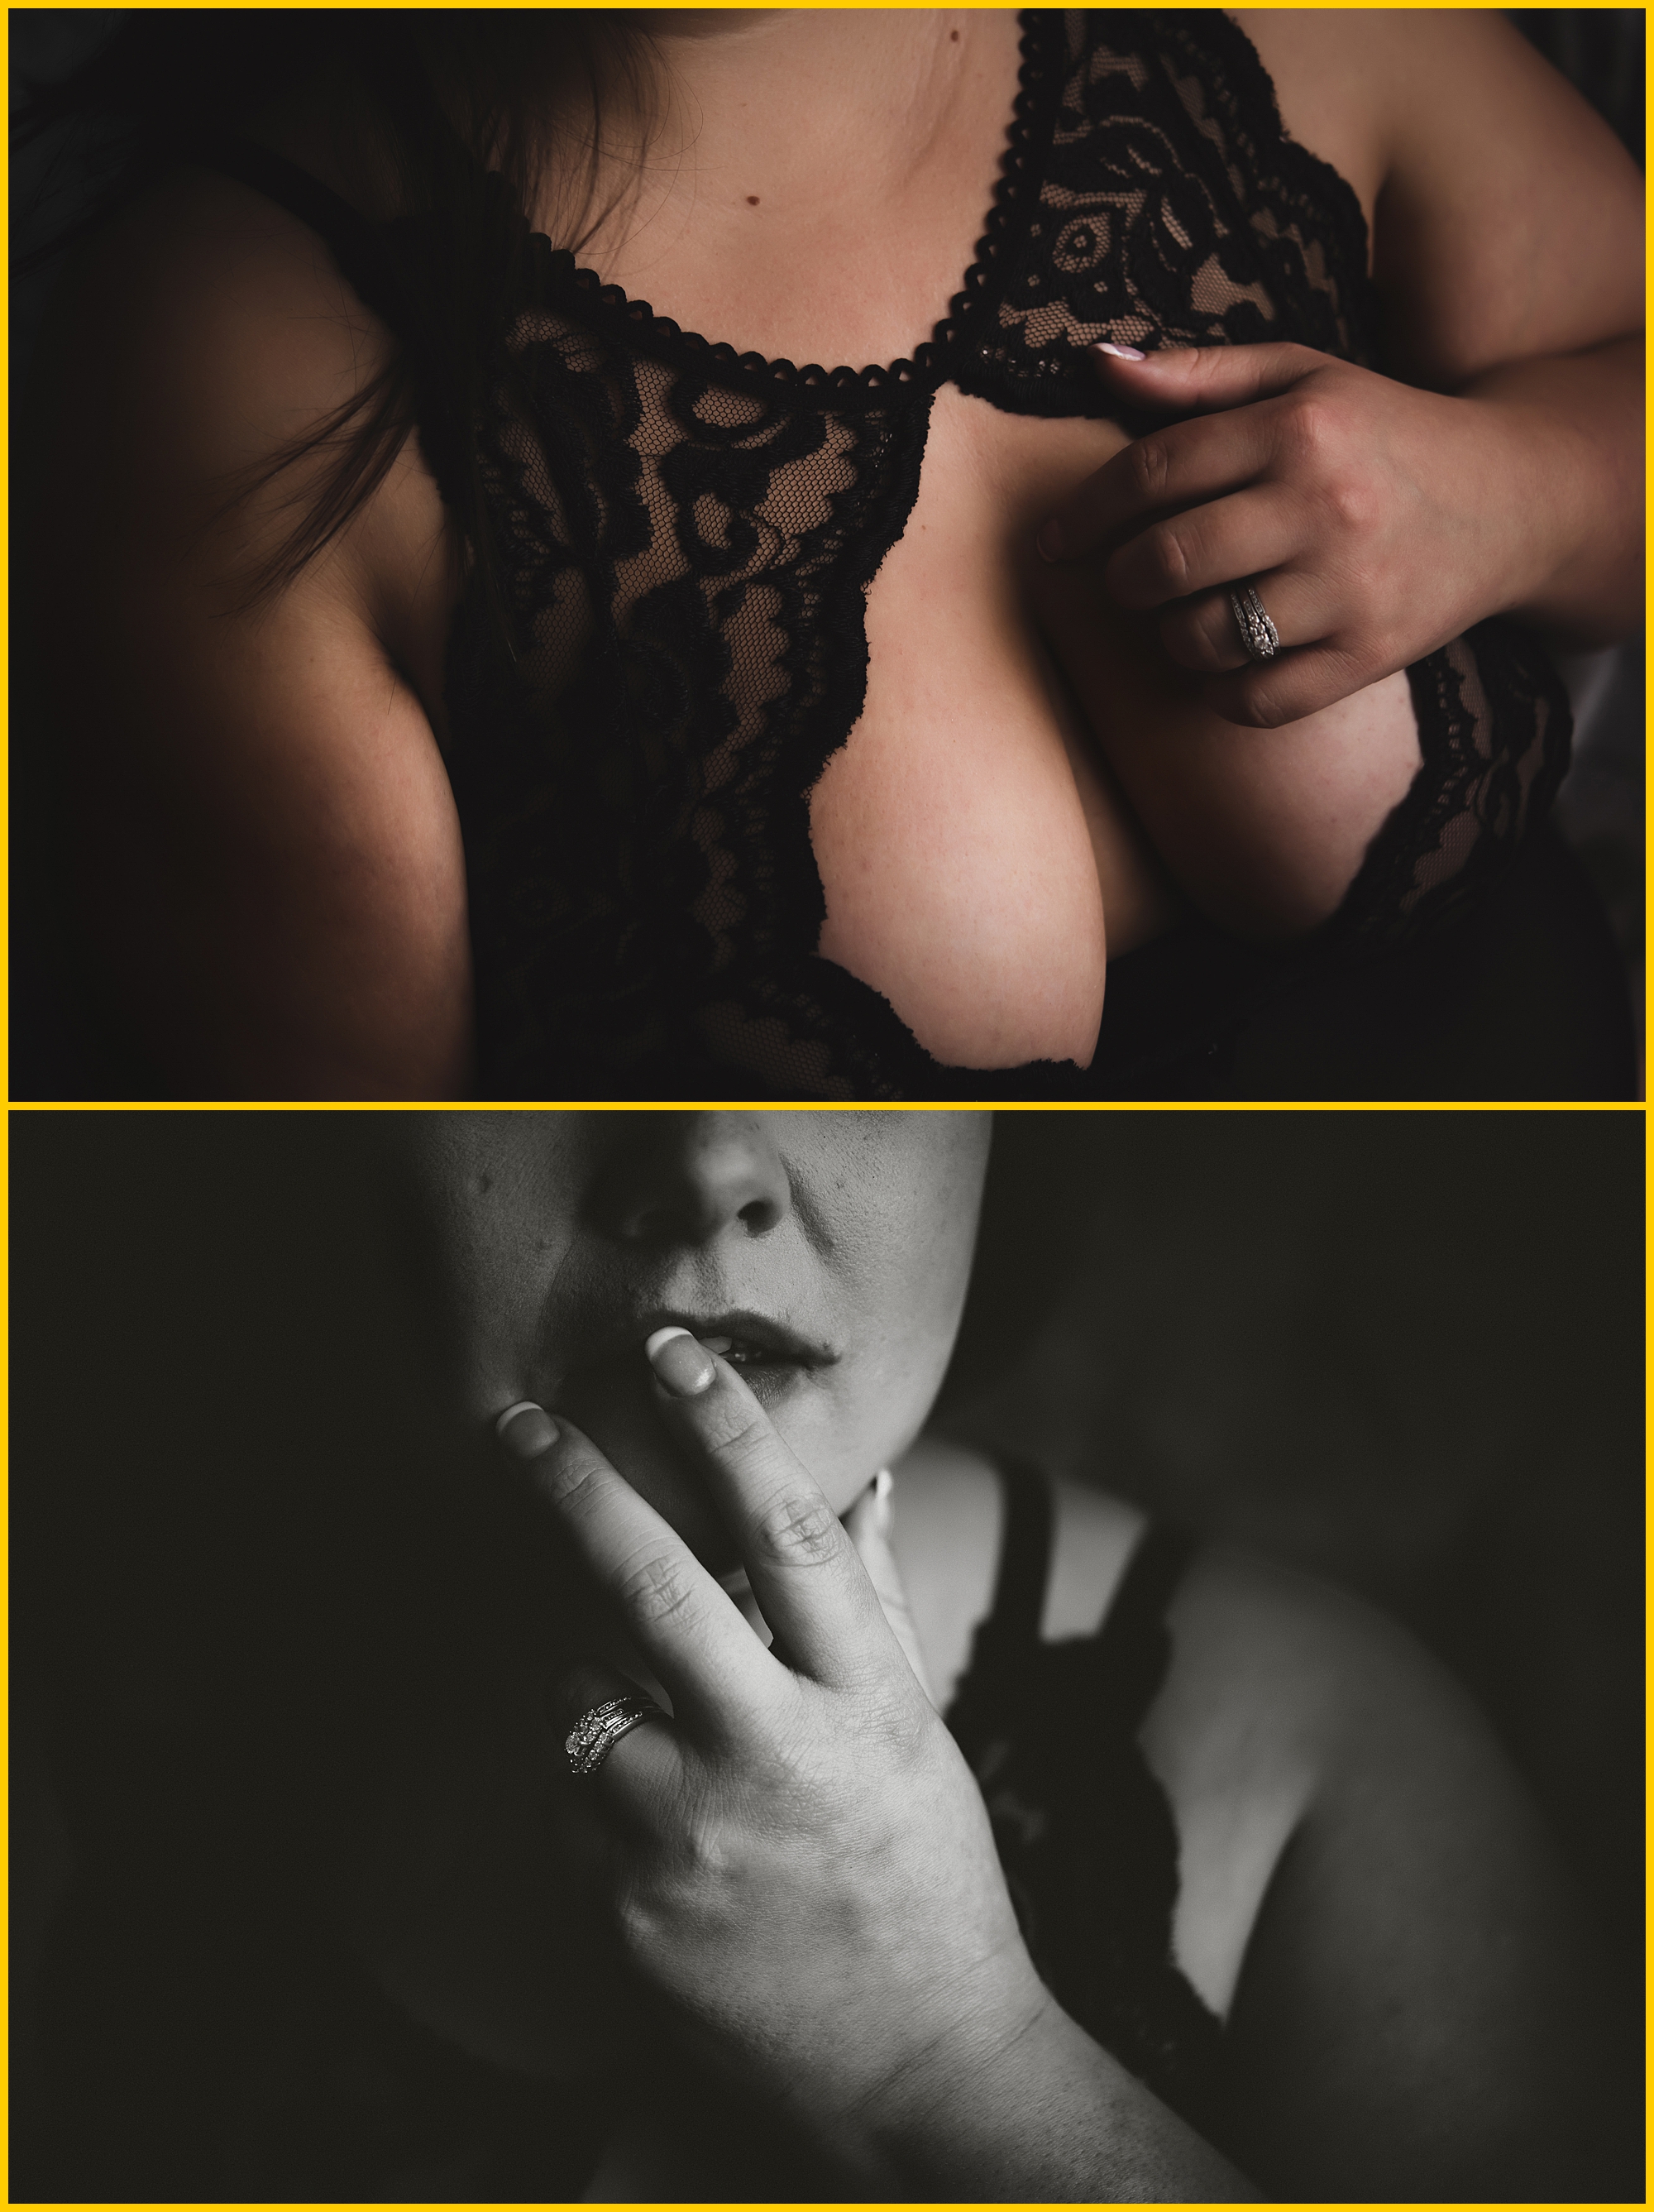 Diptych of woman during boudoir experience close-up of breasts with hand holding lingerie, black and white image close-up of mouth with hand placed over lips